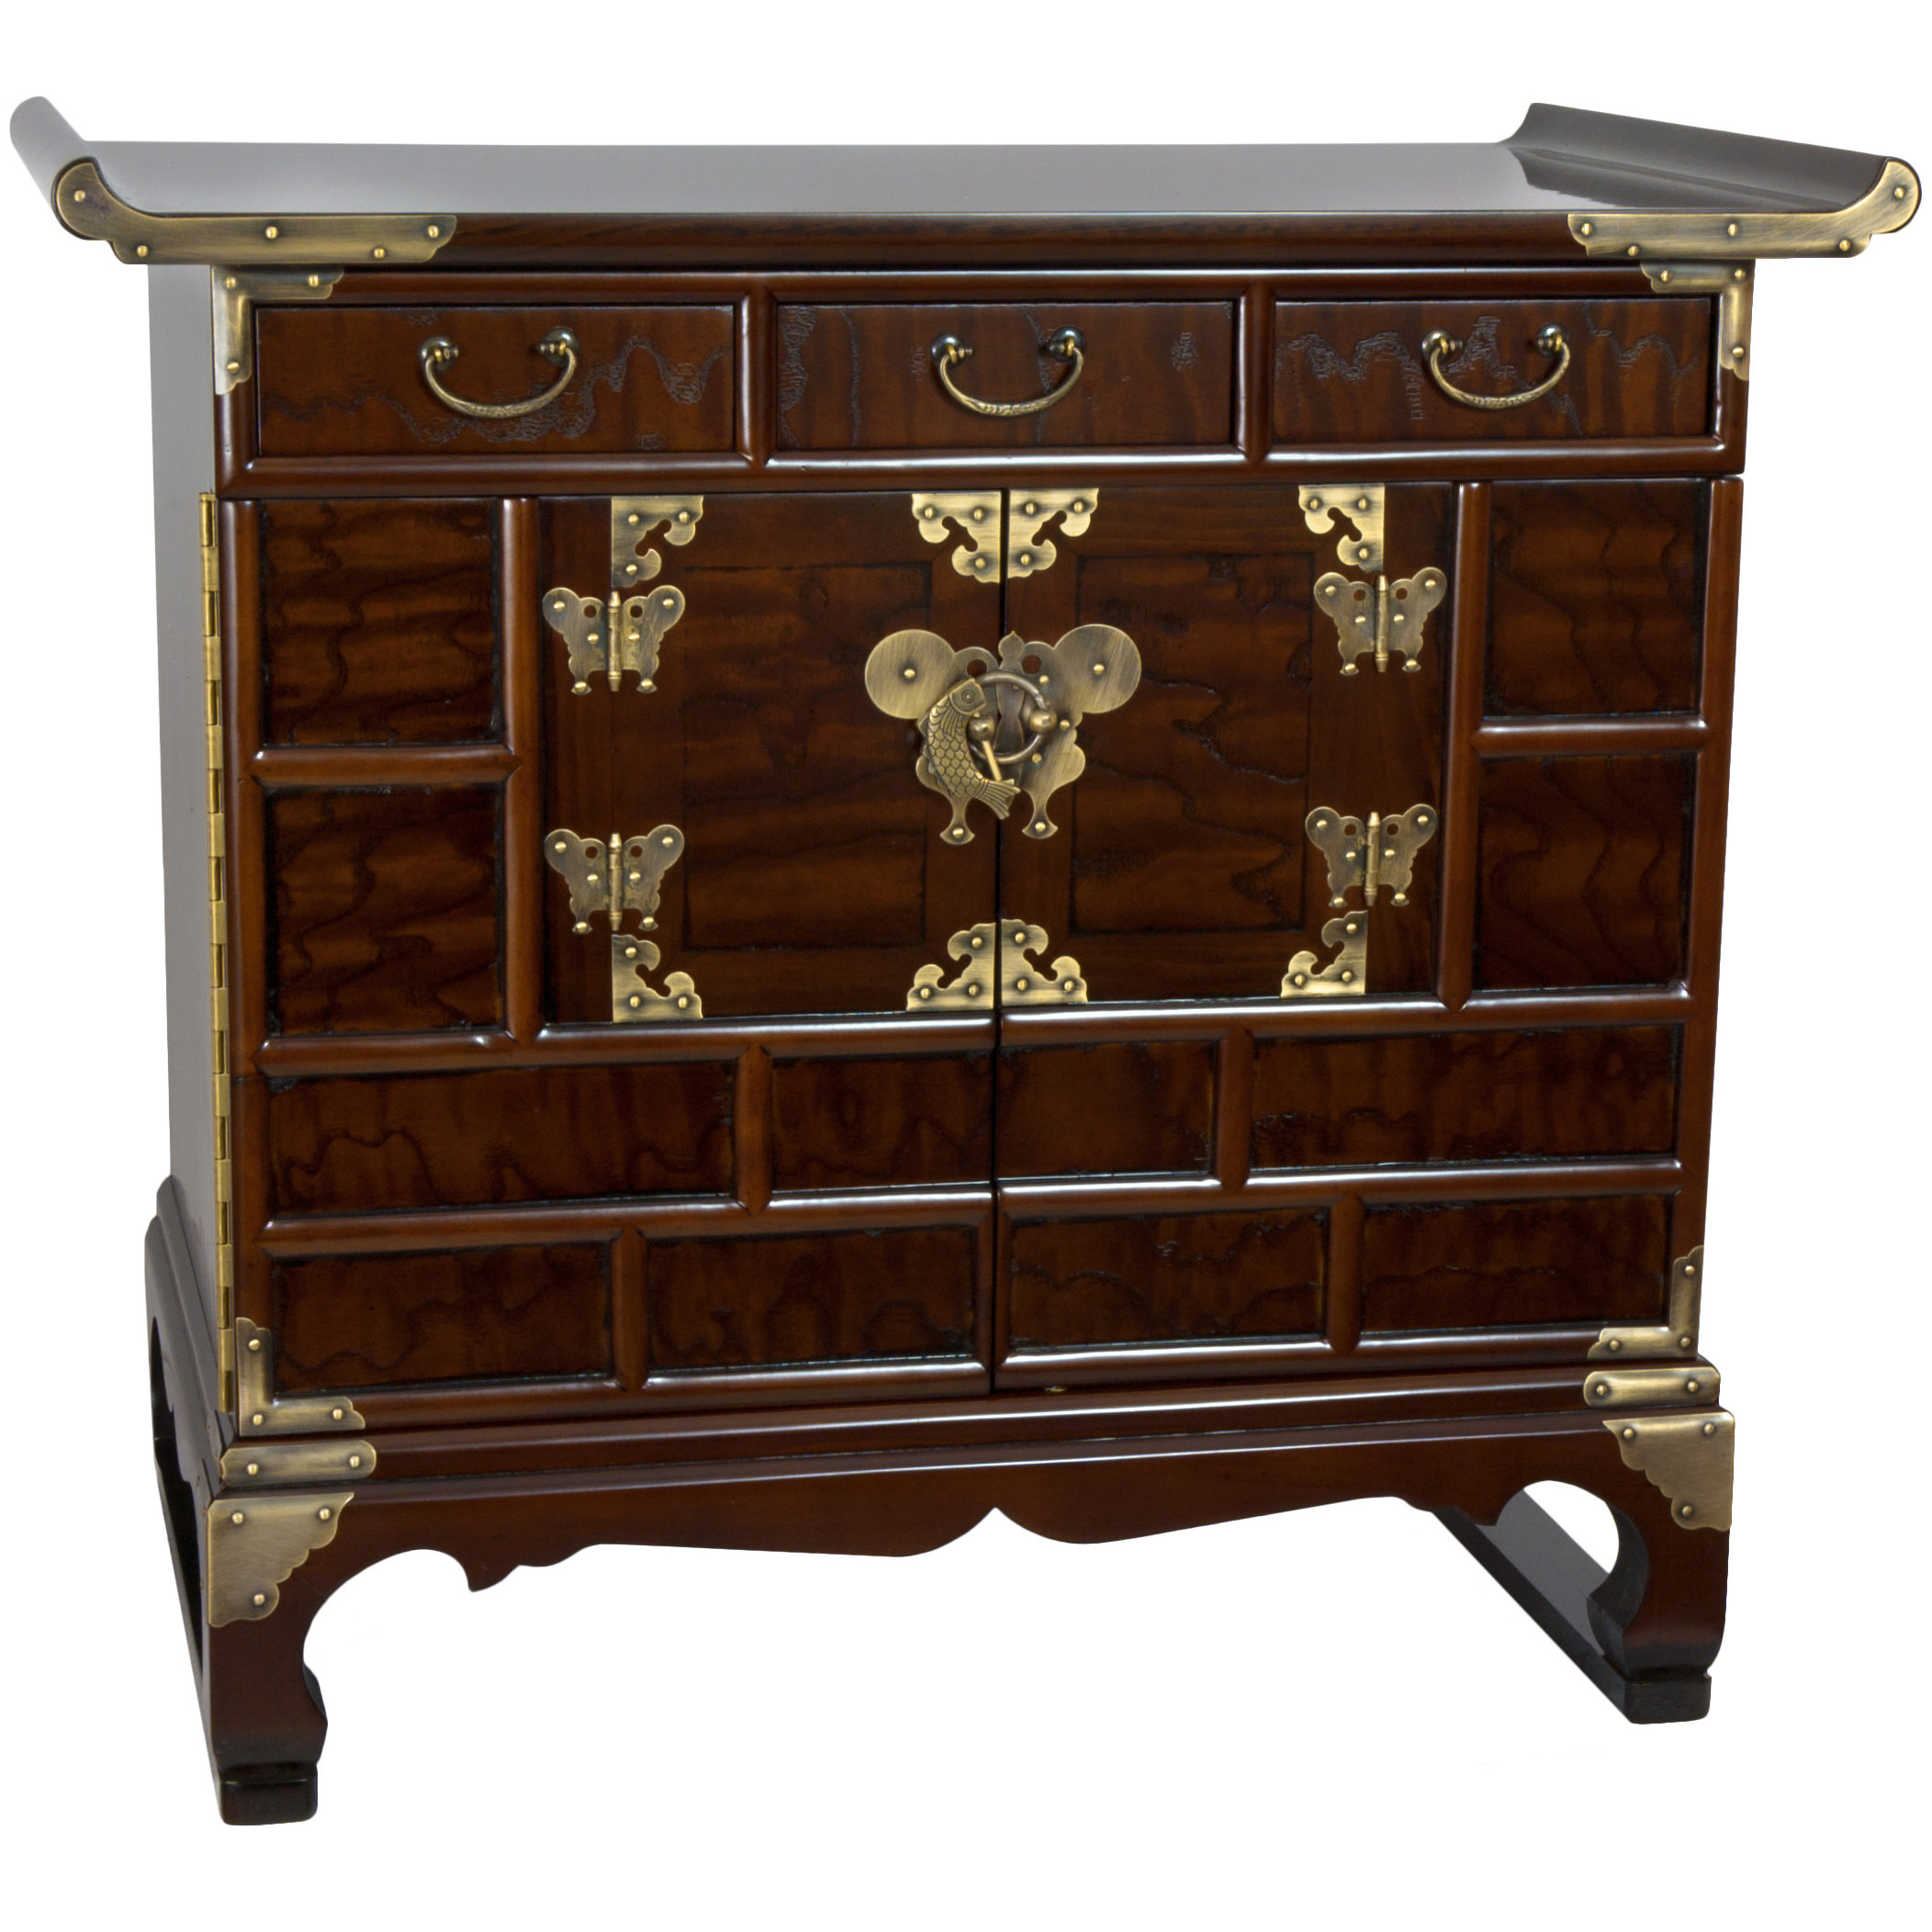 oriental furniture korean drawer end table accent cabinet tables with drawers ikea nest entryway mirror magnussen sofa hampton bay covers teak occasional maple small trestle legs